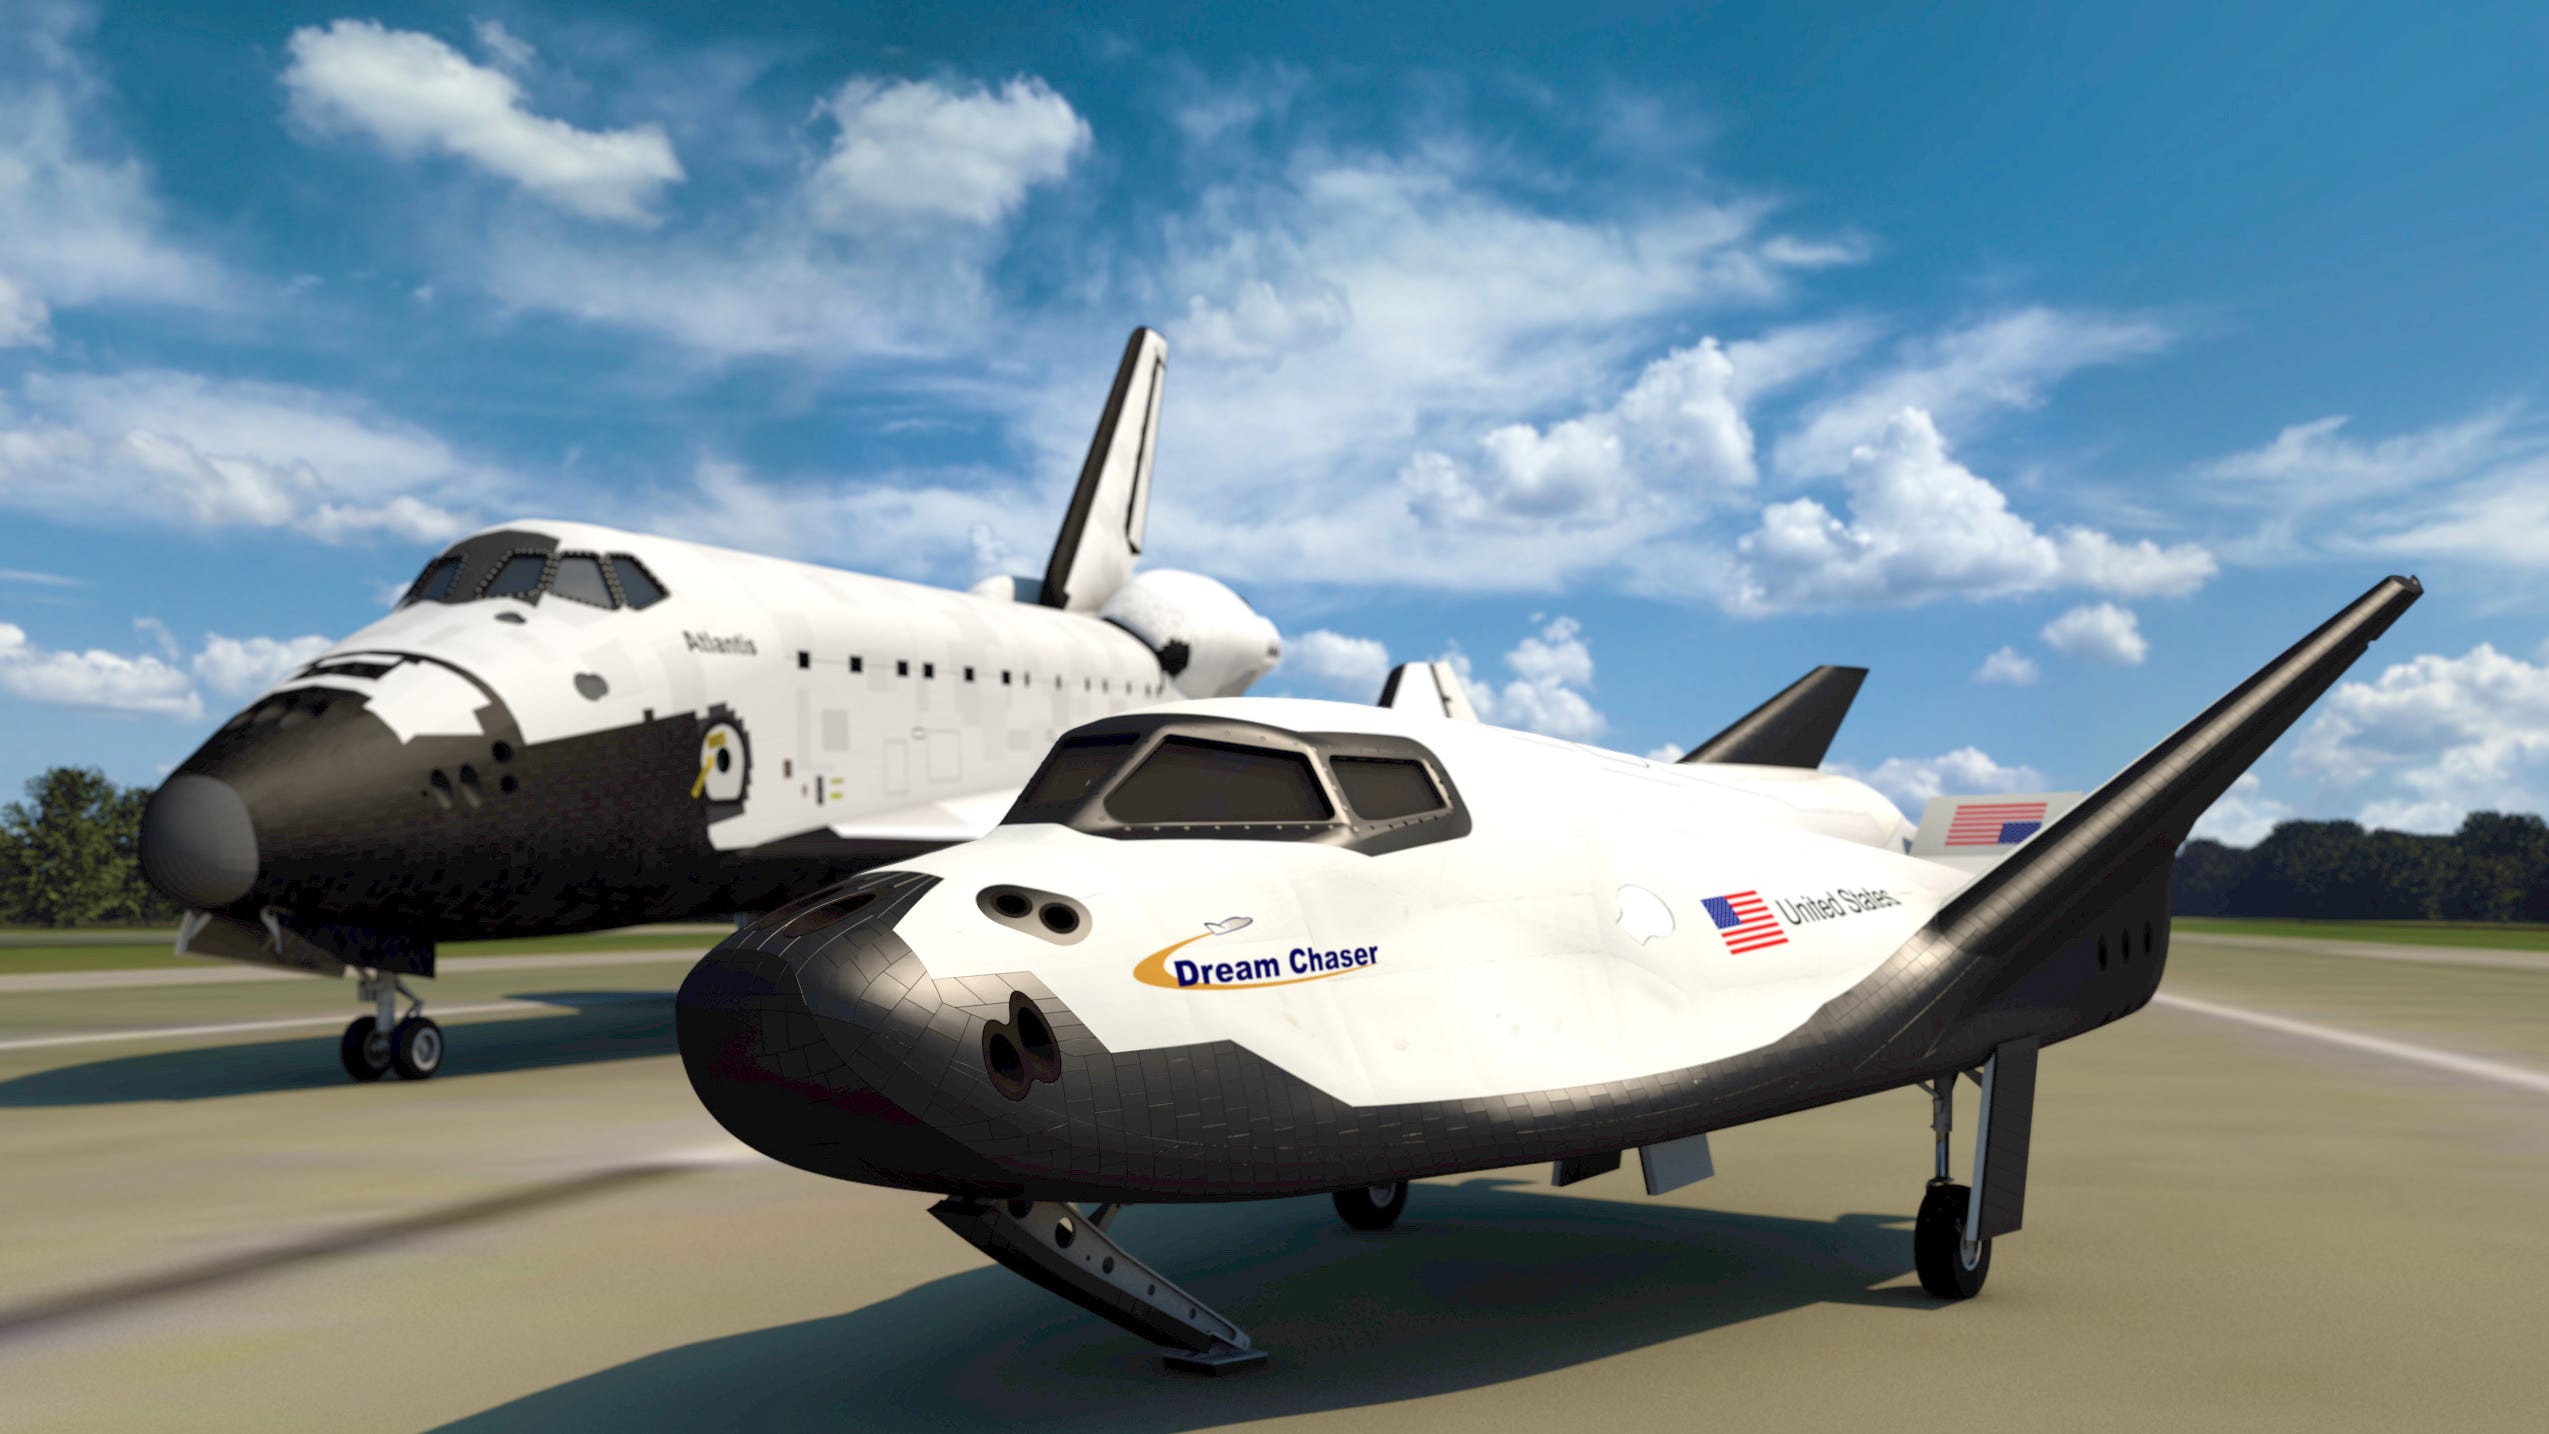 Minispace shuttle Dream Chaser to launch and land at Kennedy Space Center